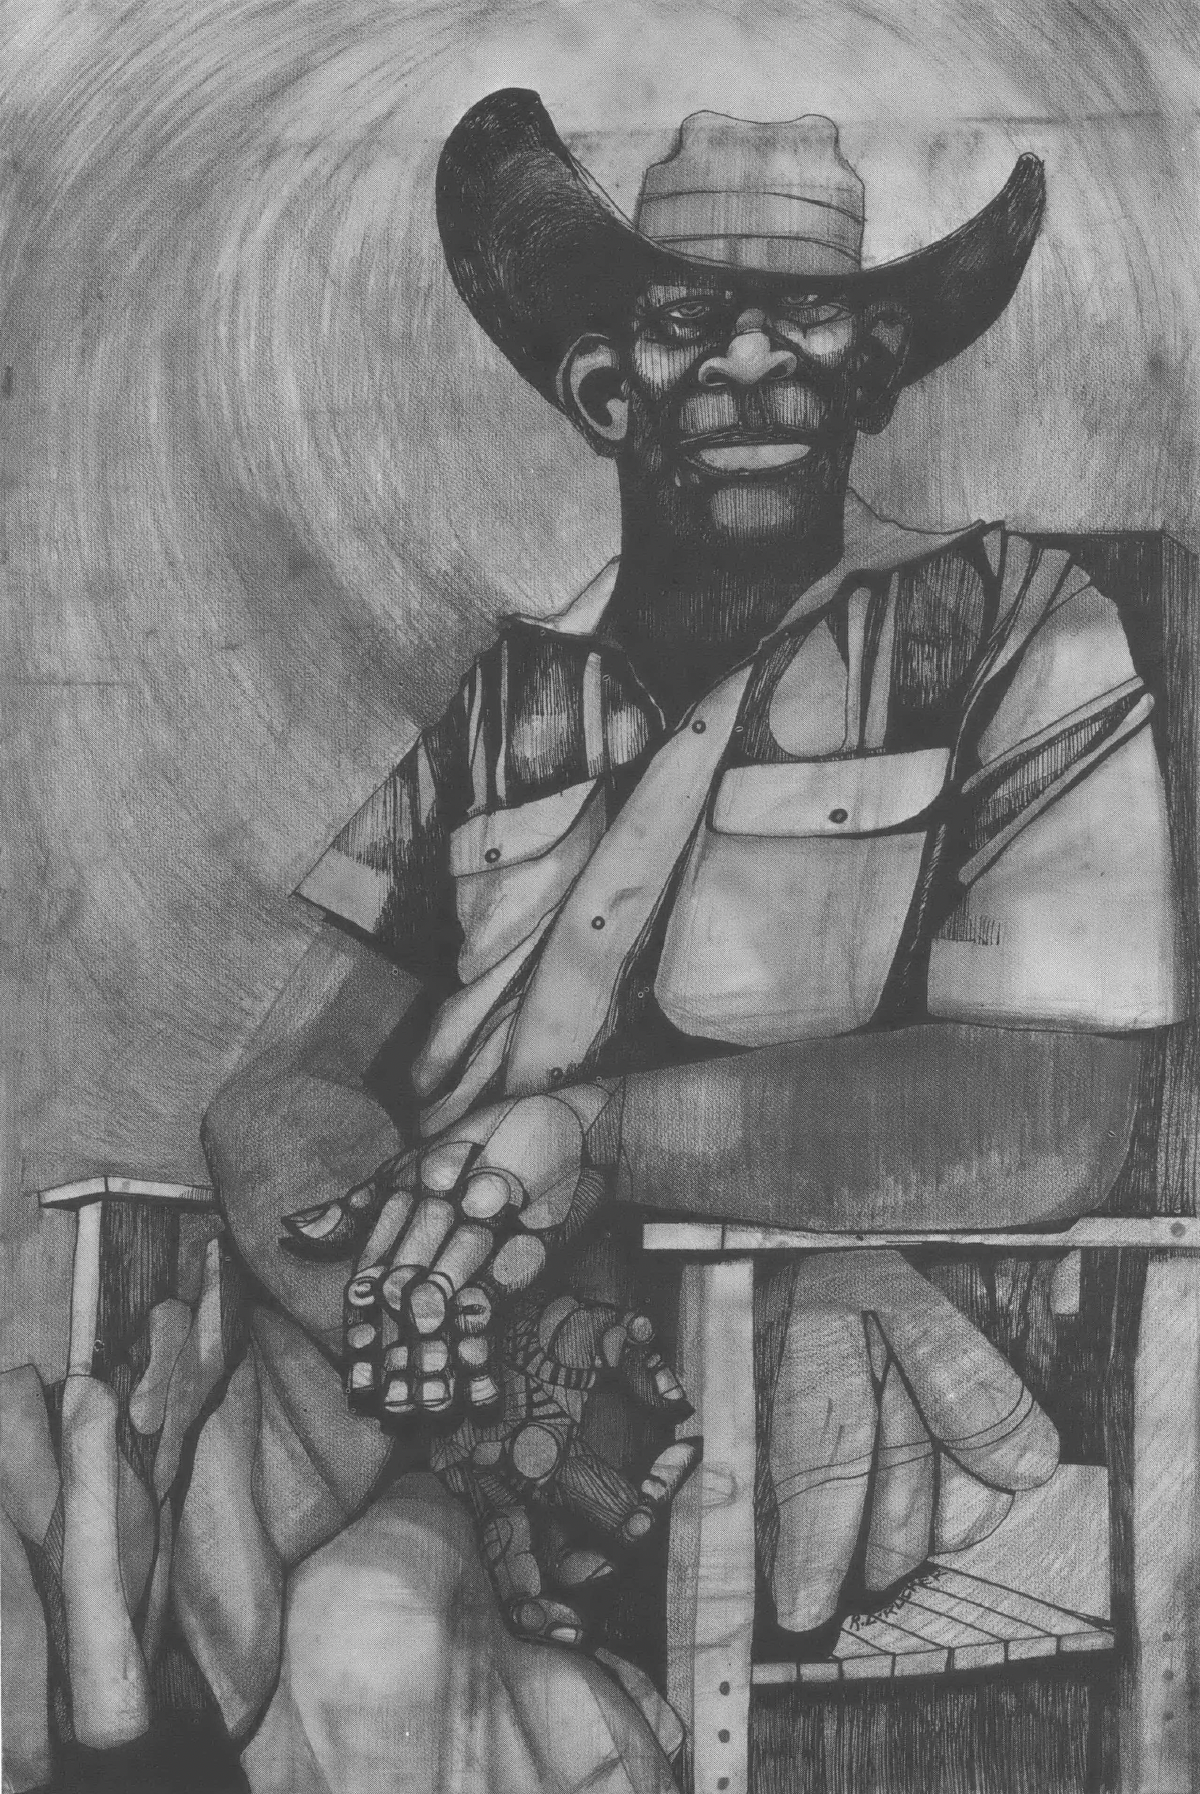 Black and white image of a Black man sitting in a chair, wearing a cowboy hat